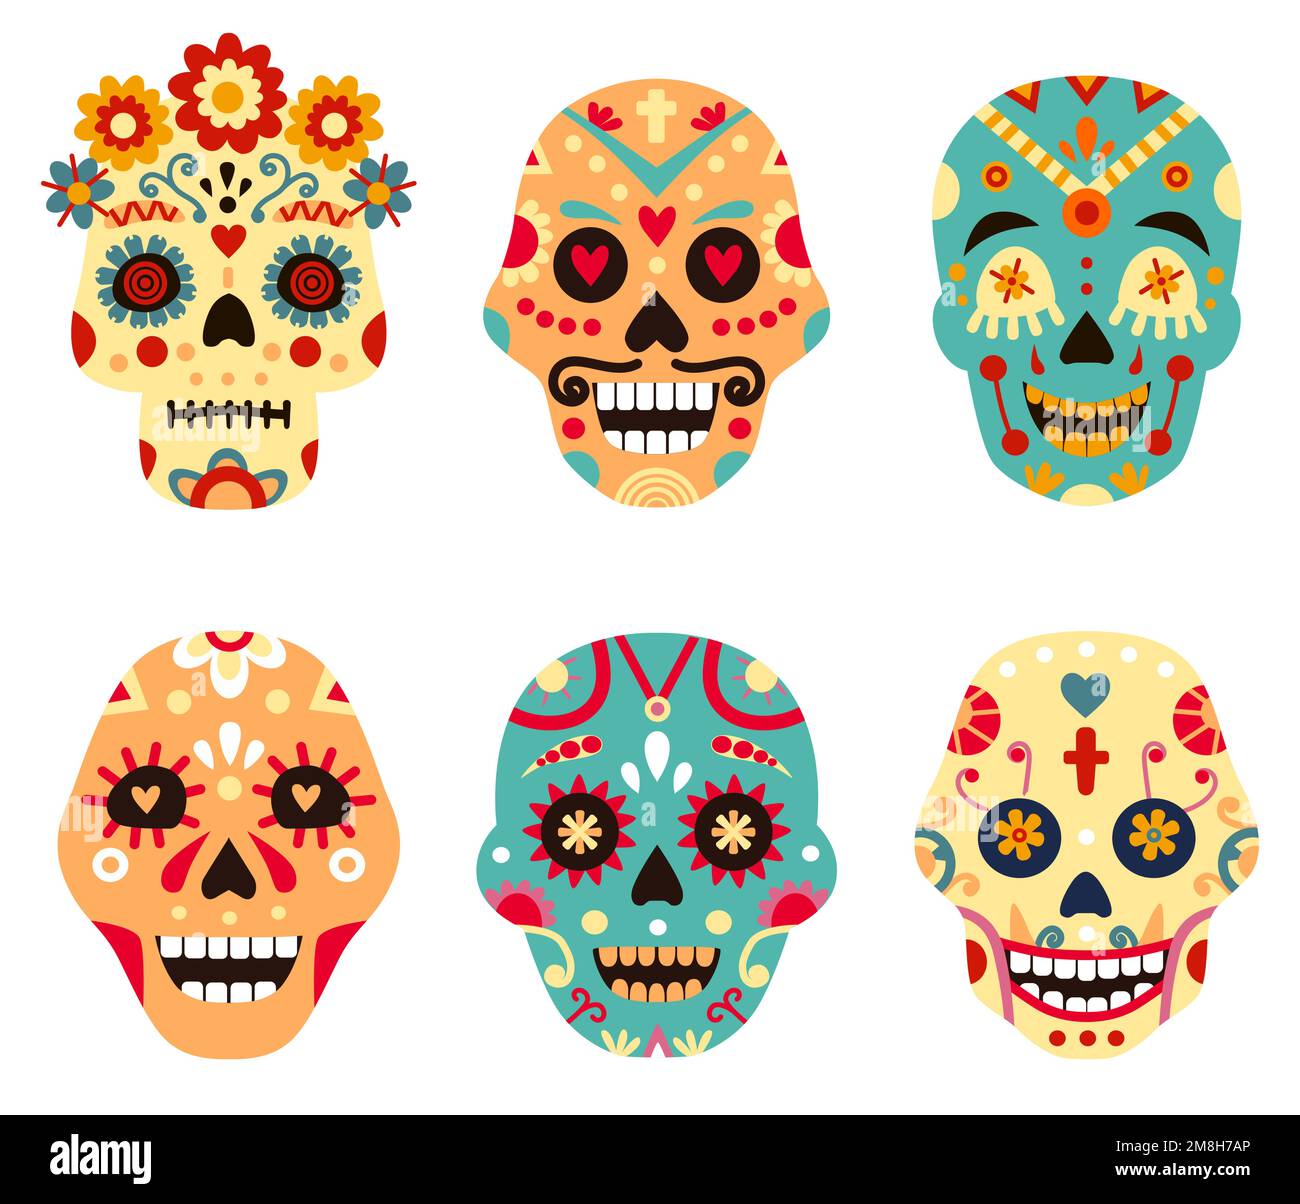 Illustration death skull, tattoo mexican decoration. Holiday celebration, traditional symbol with floral disign such as flowers Stock Vector